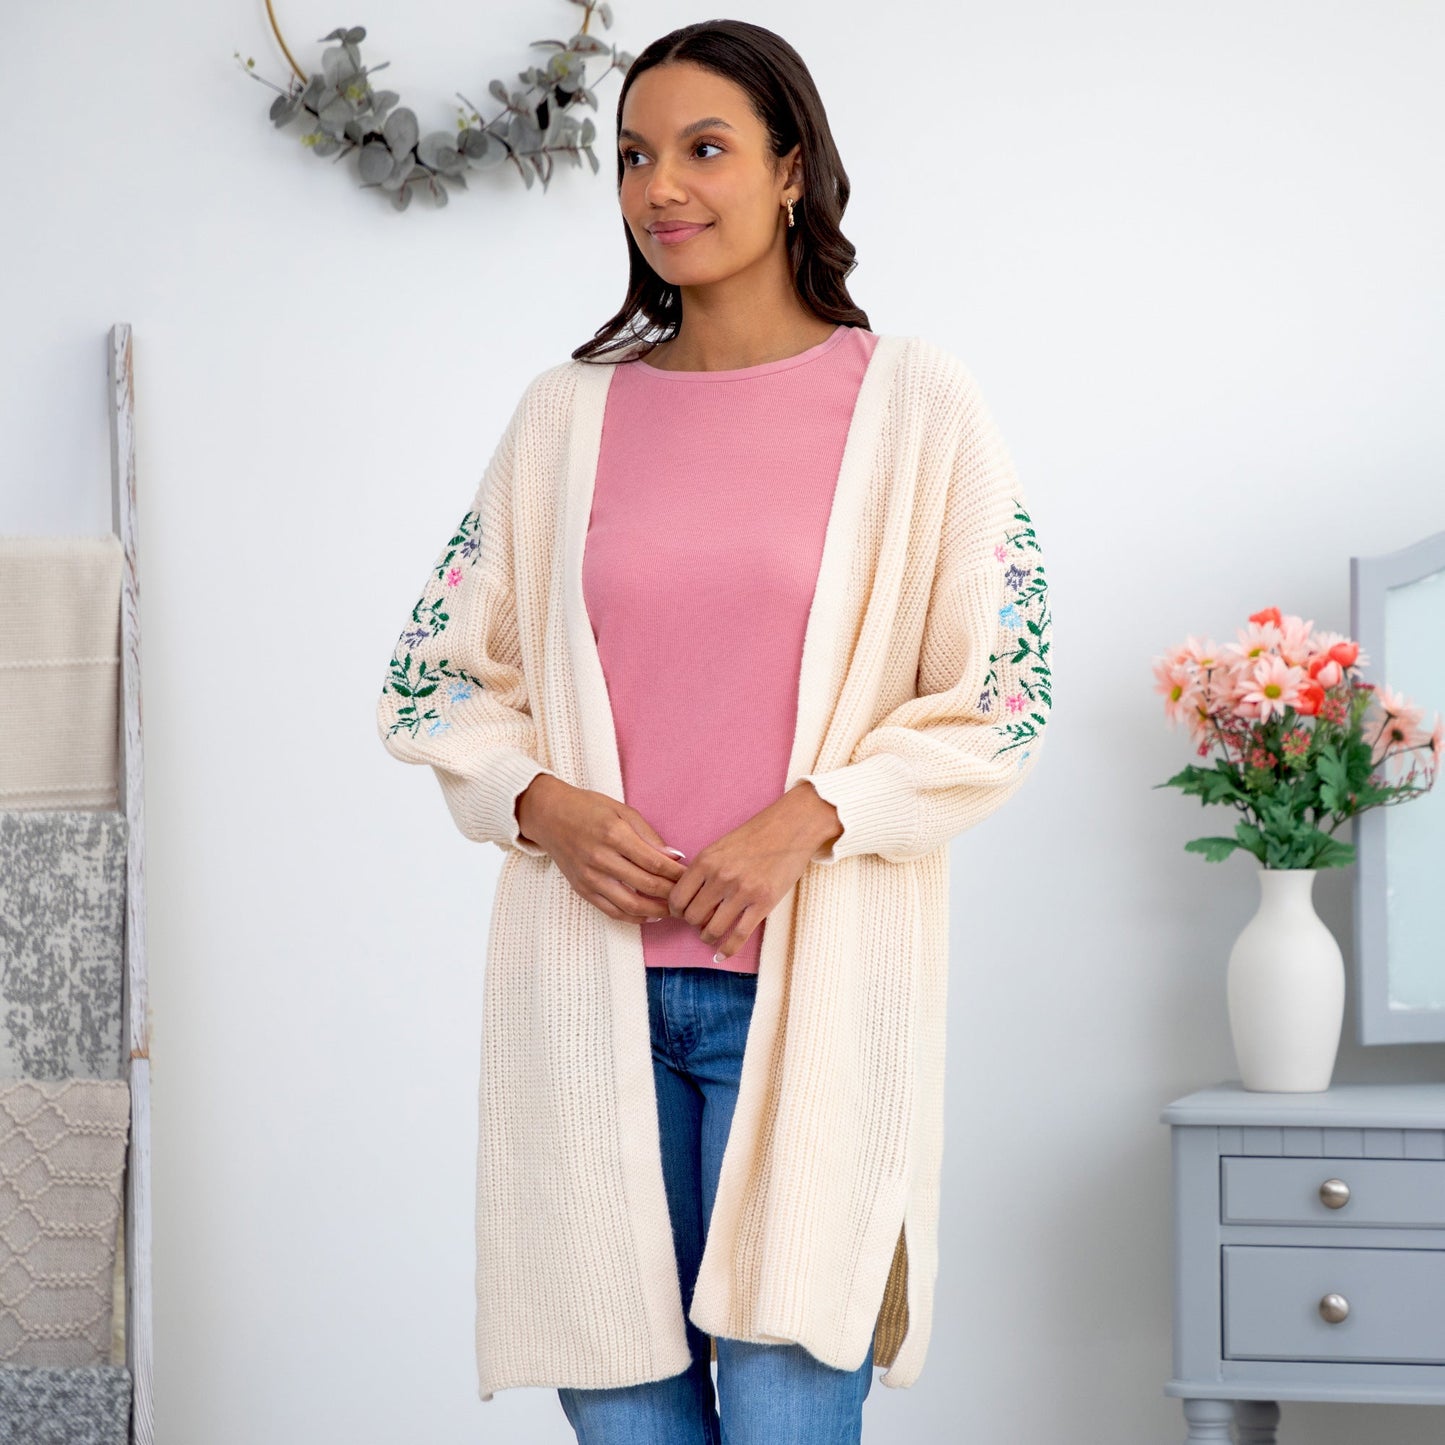 Paw Floral Vine Accented Cardigan